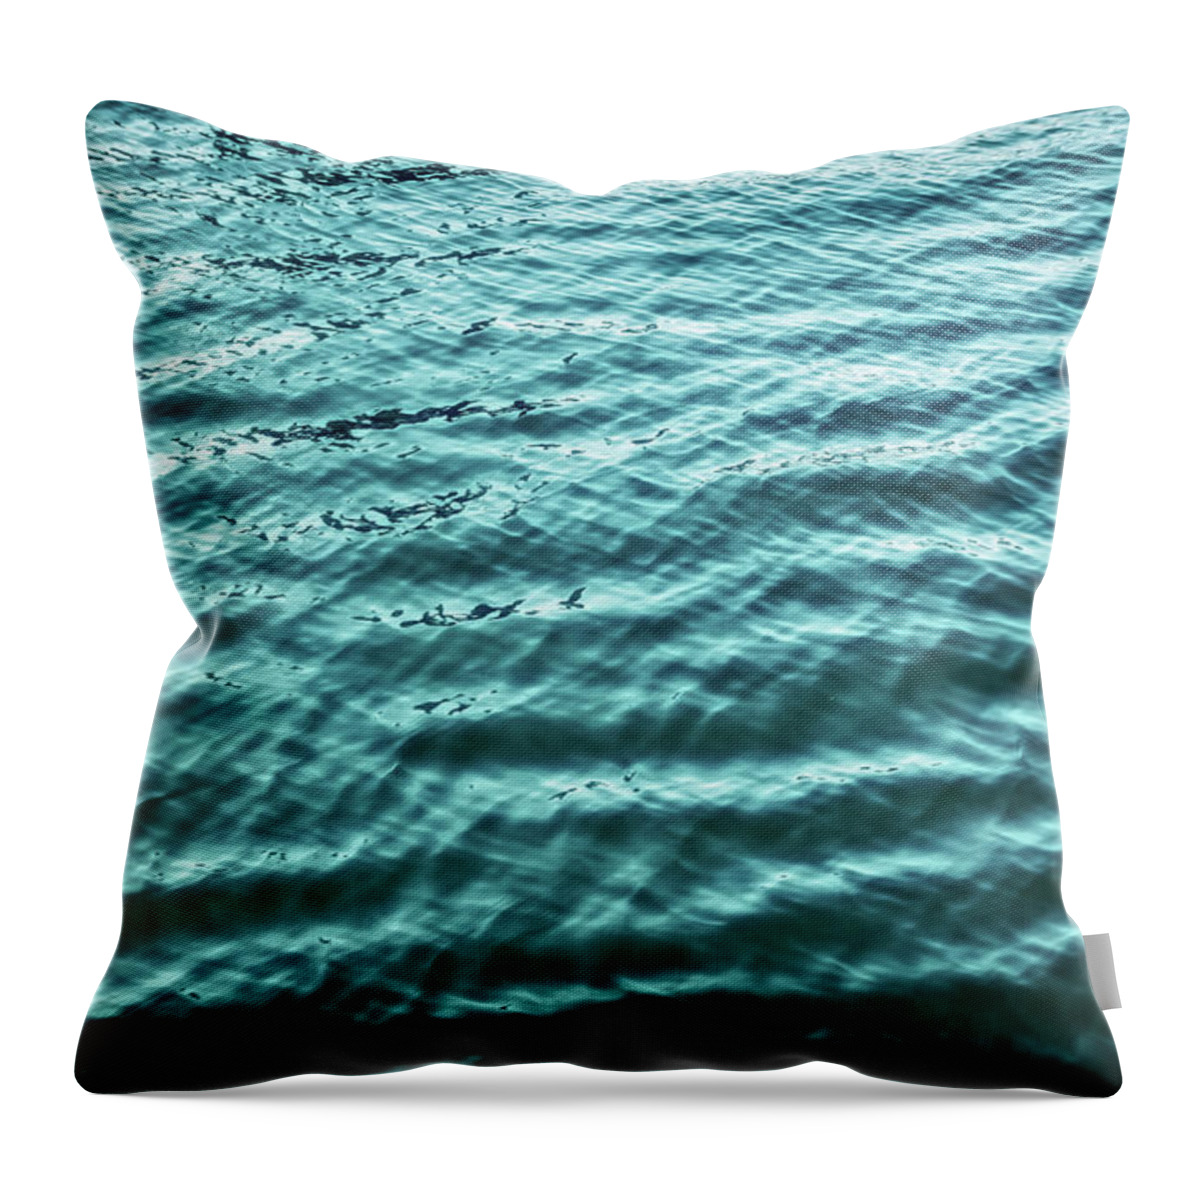 Shadow Throw Pillow featuring the photograph Blue Water Surface With Smooth Wave by Assalve